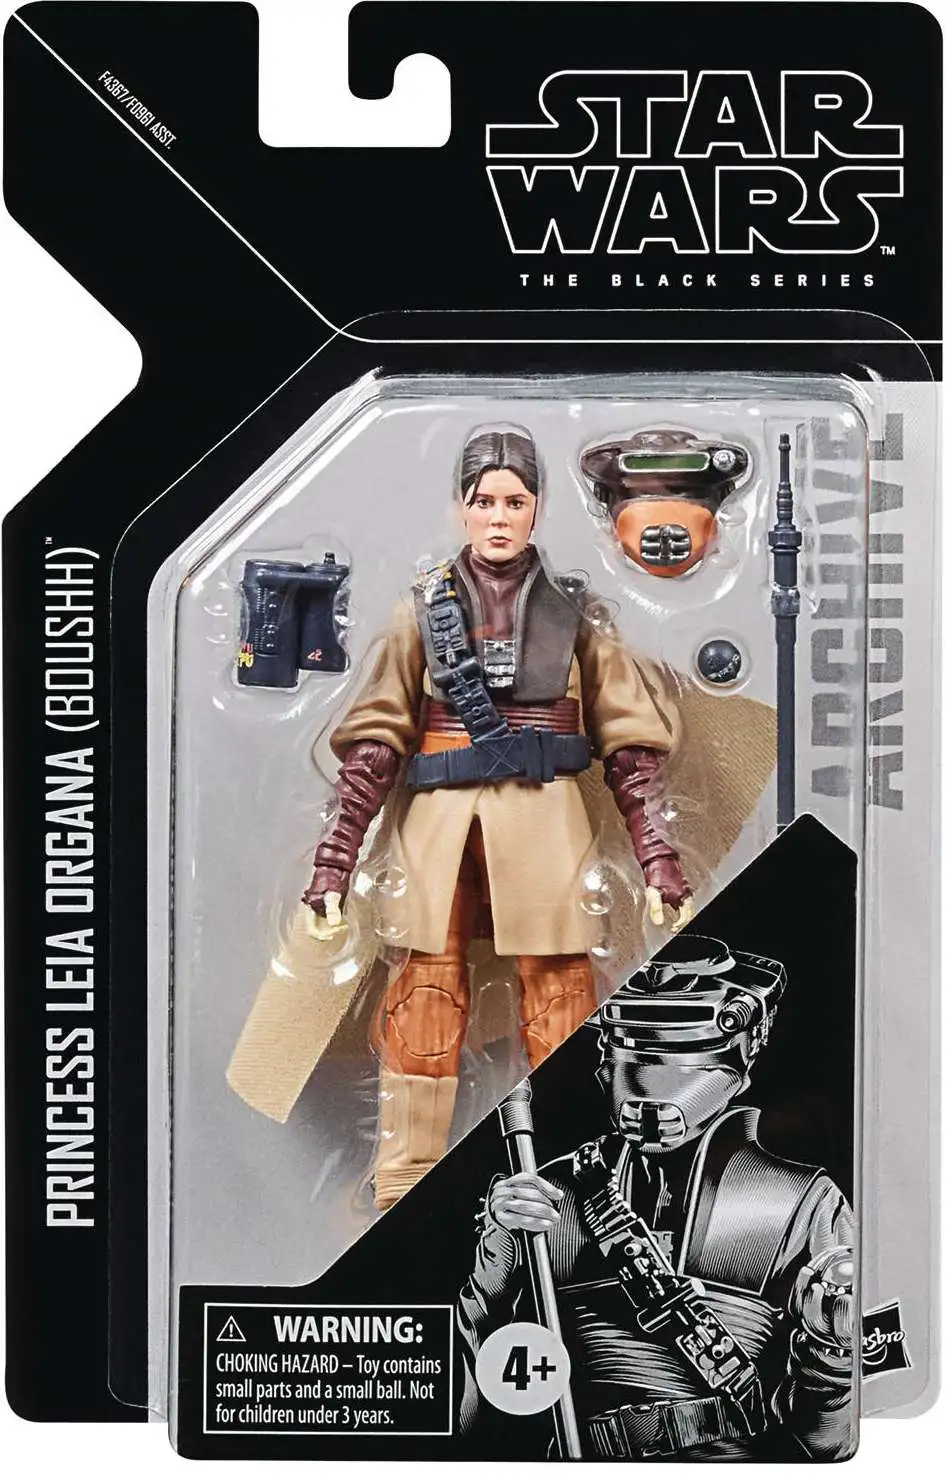 Leia In Boushh Disguise Action Figure for sale online Kenner Star Wars 